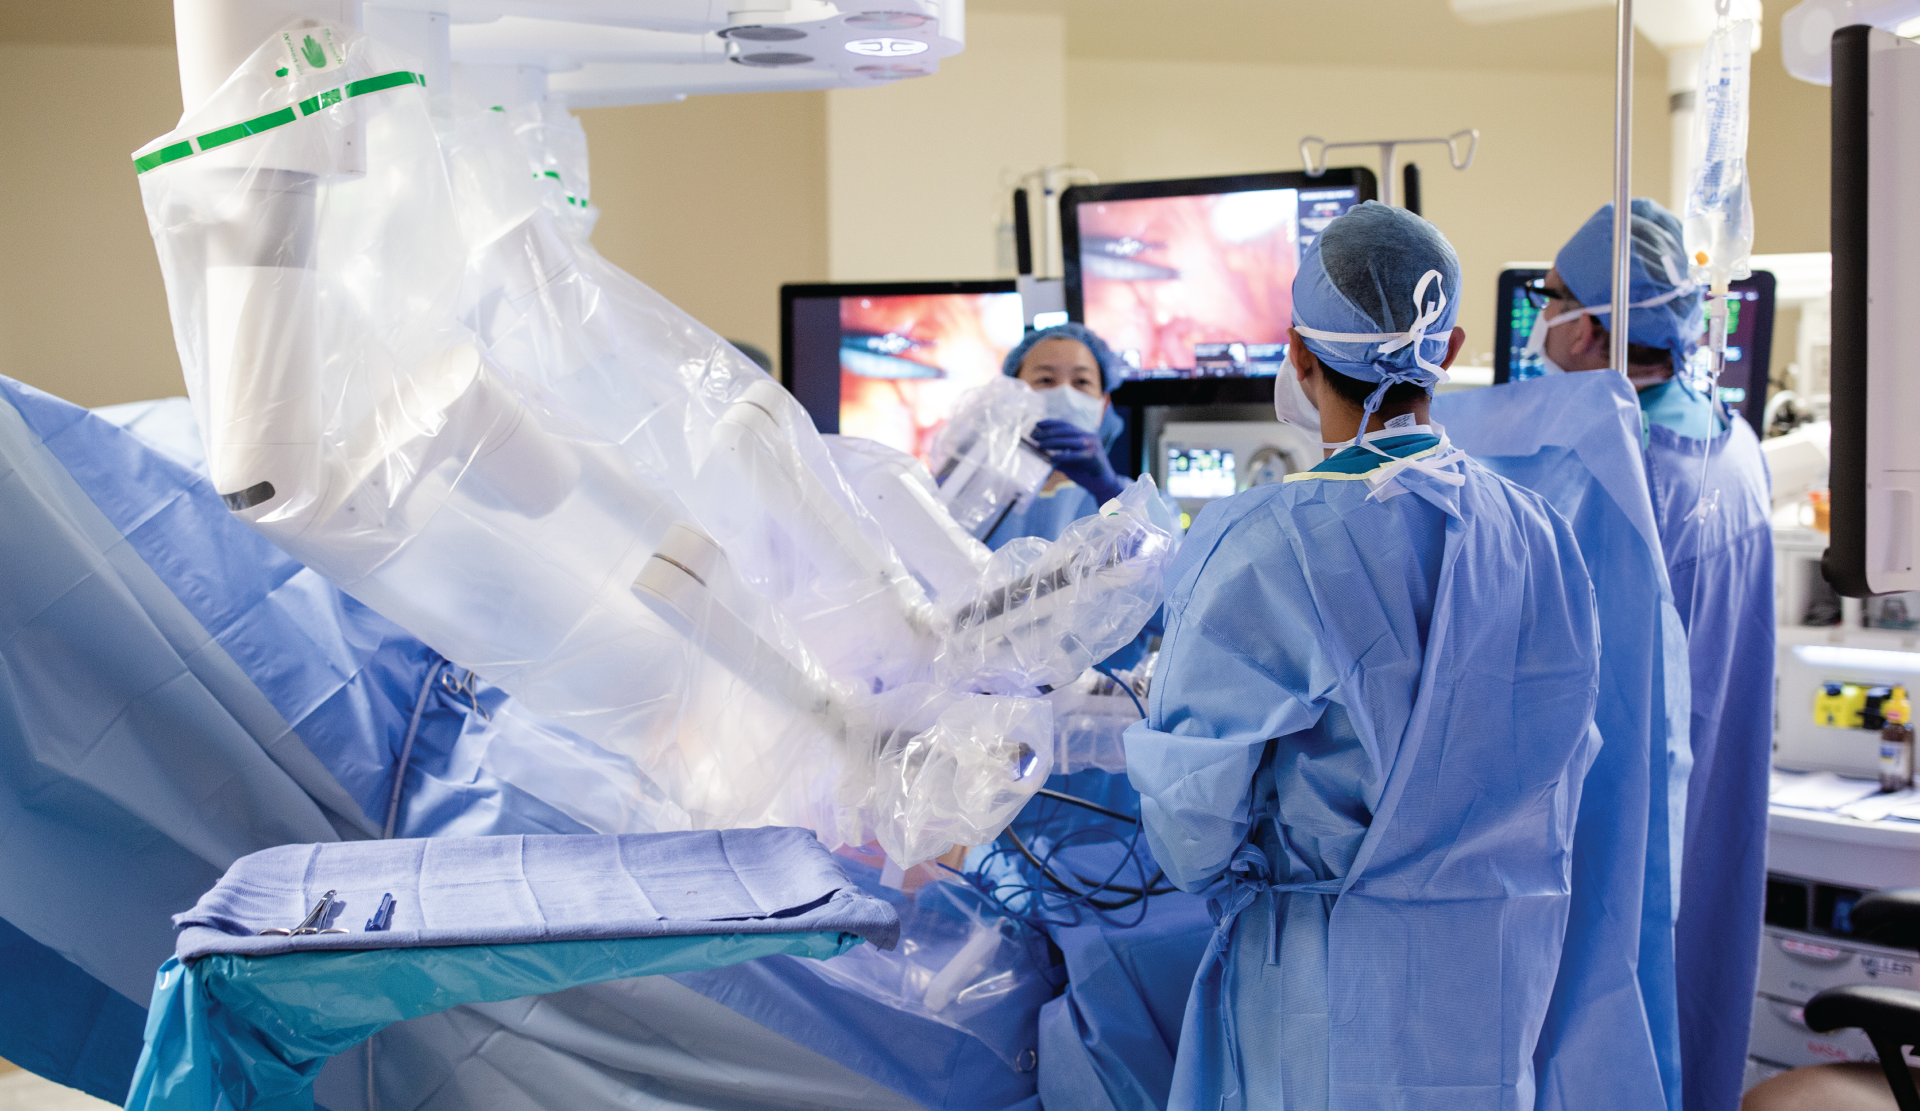 In the operating room during a robotic-assisted surgery.